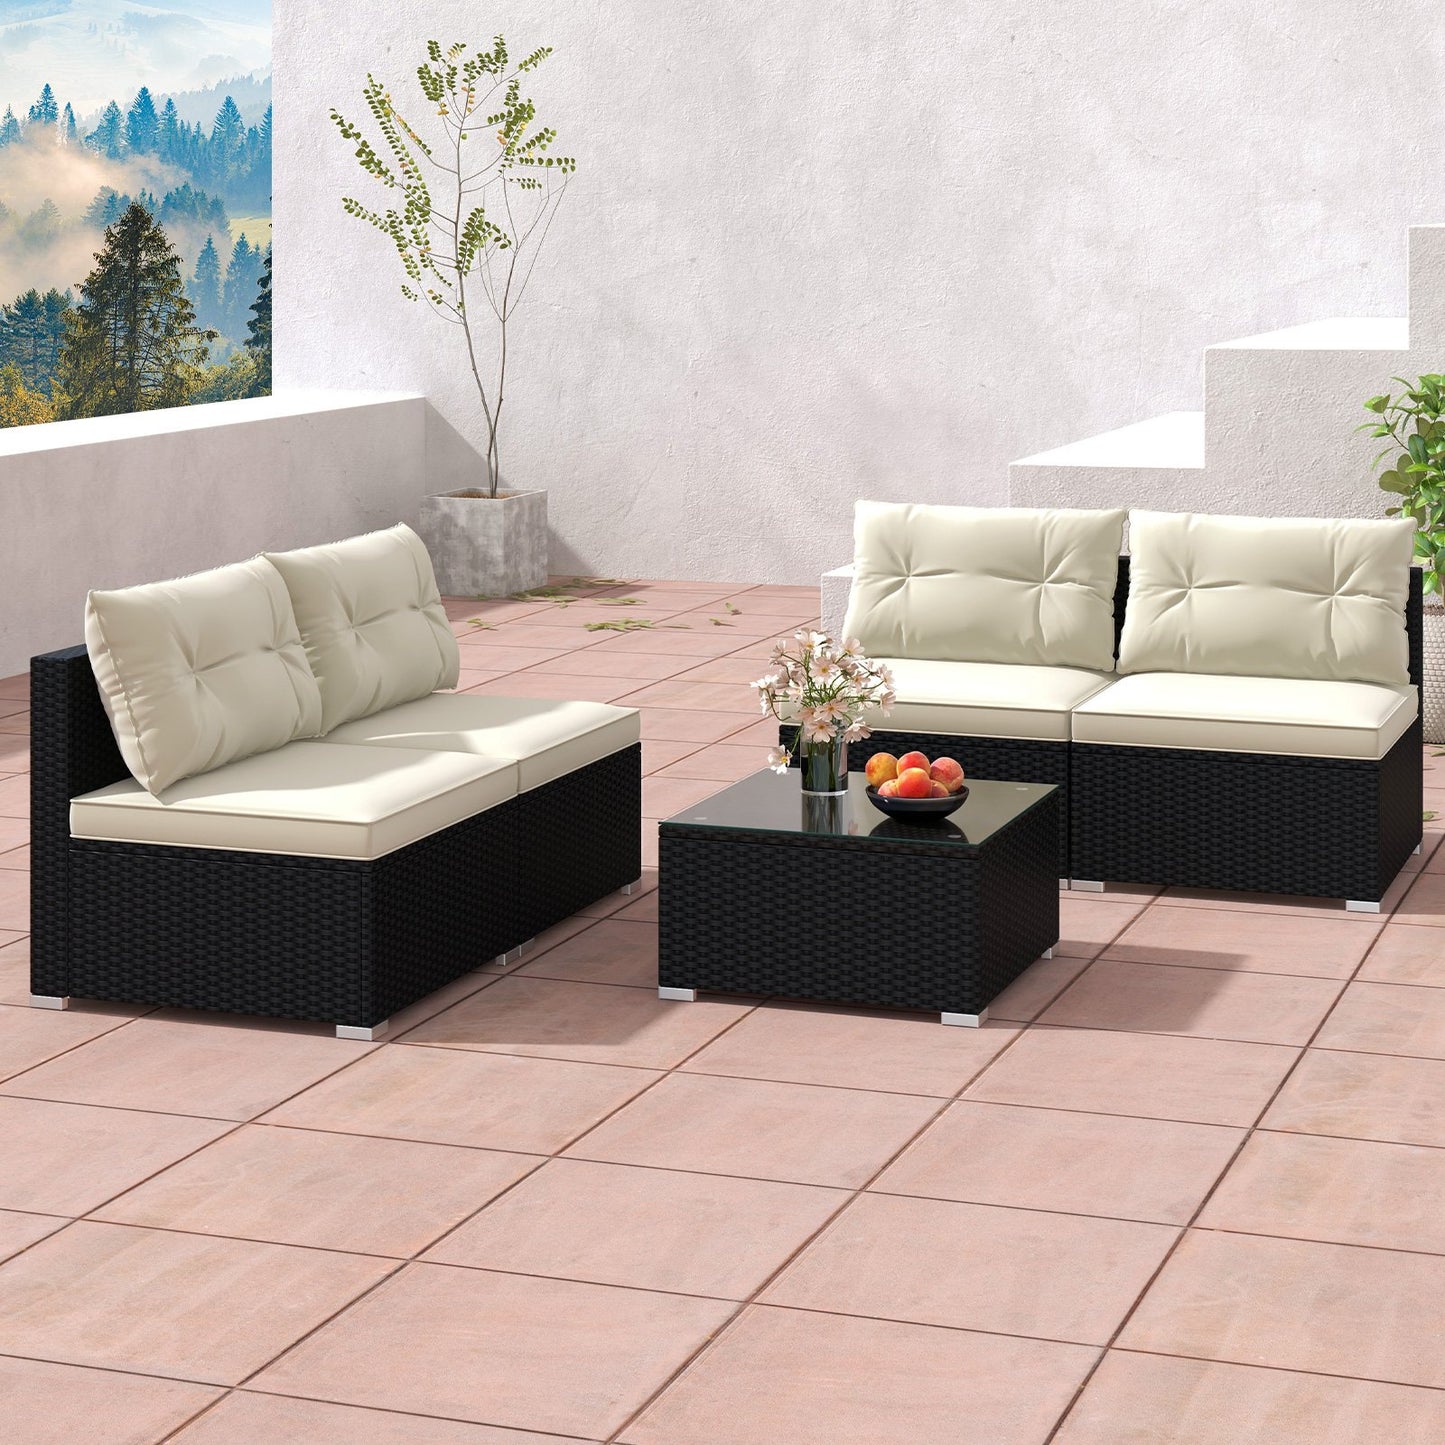 5 Pieces Outdoor Patio Furniture Set with Cushions and Coffee Table, Off White